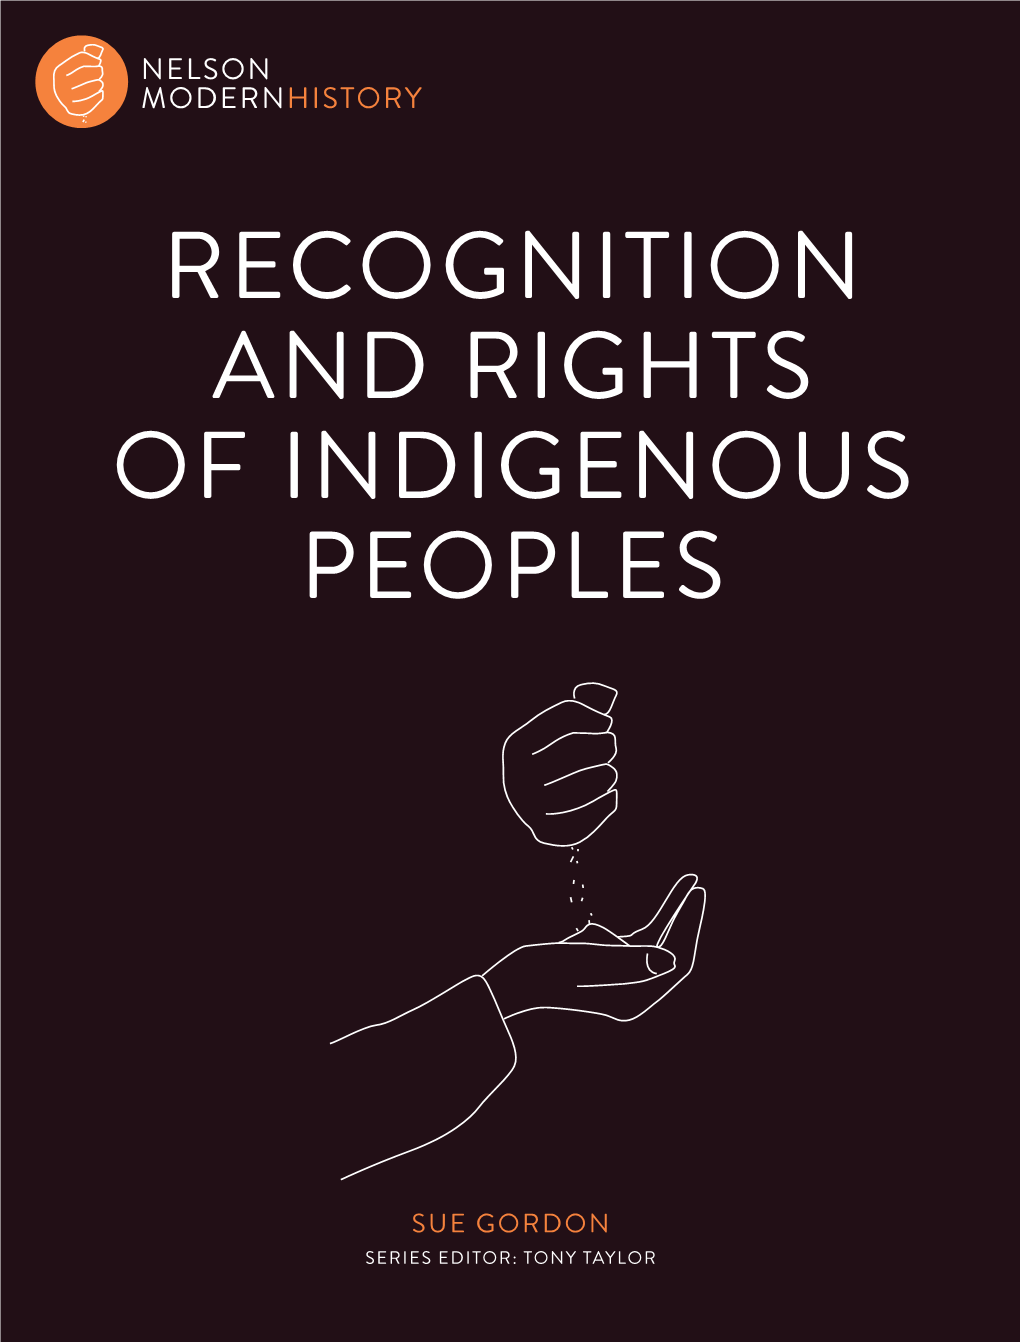 Recognition and Rights of Indigenous Peoples Secondary Sources, and Learning Activities